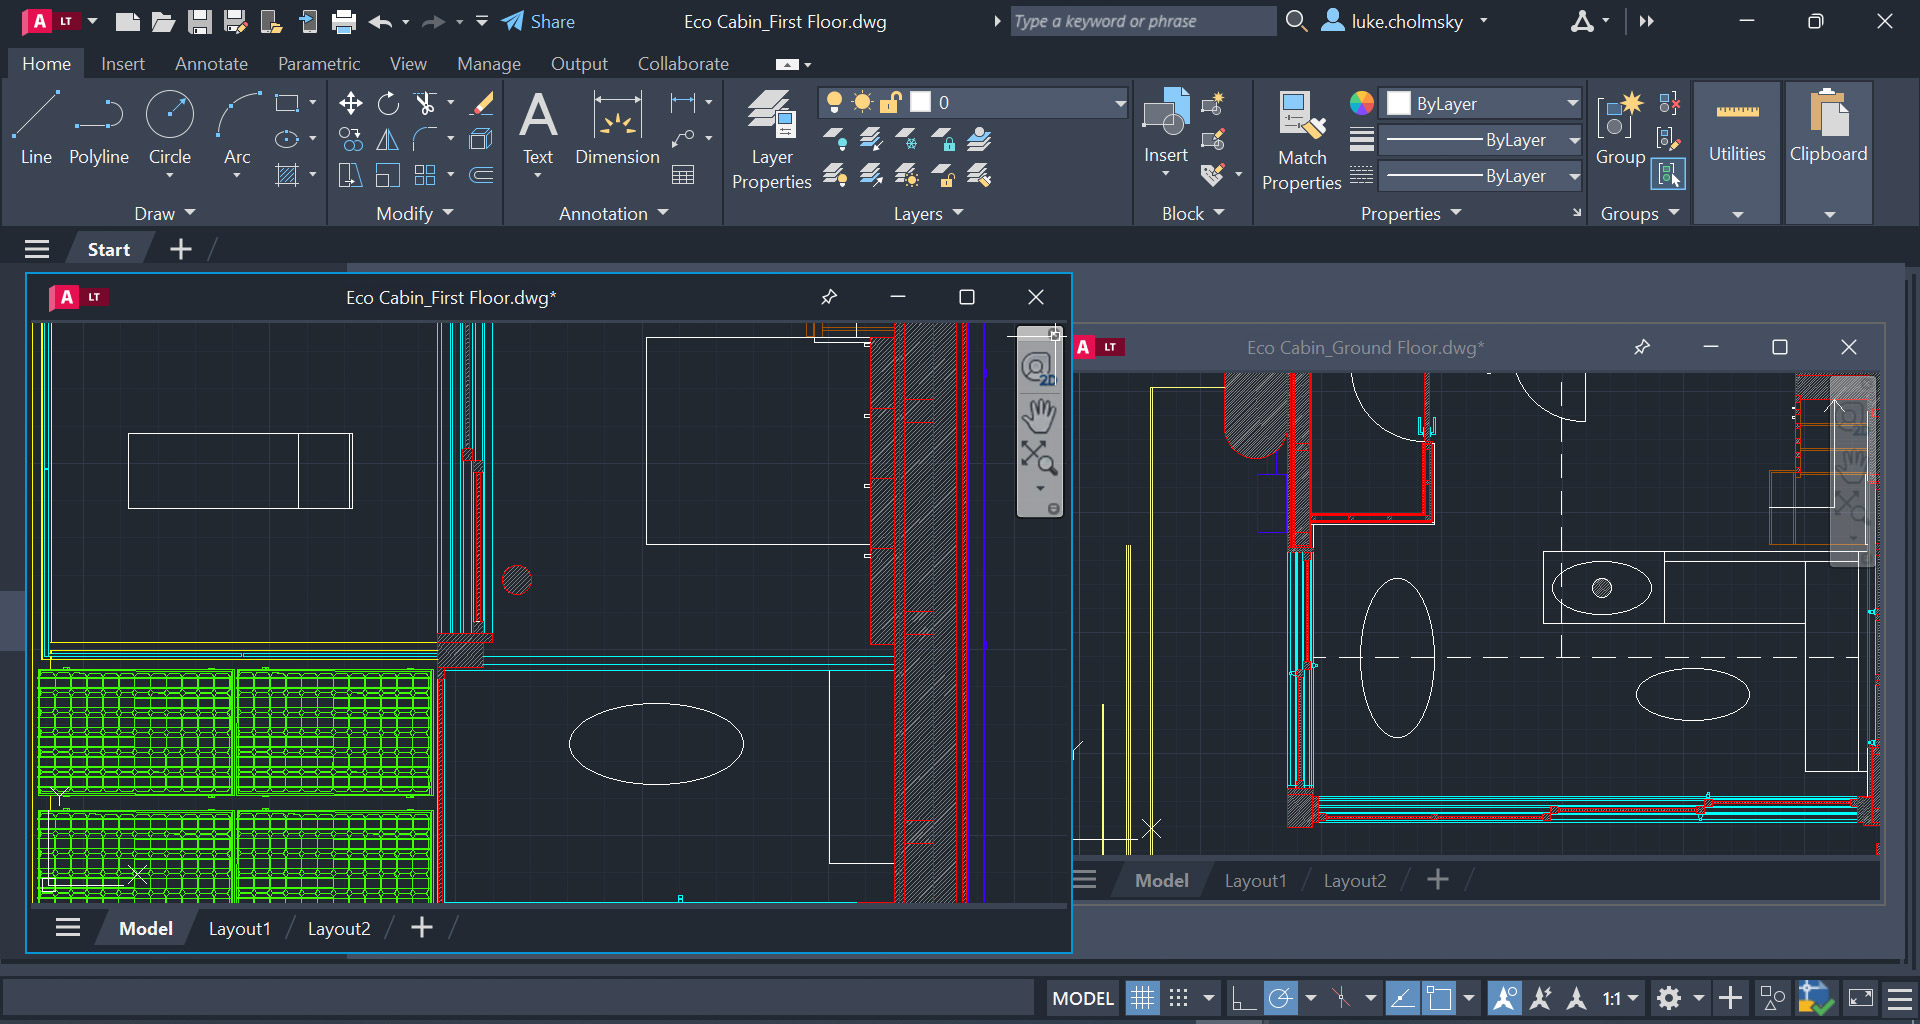 View of floating windows with side-by-side projects in AutoCAD LT